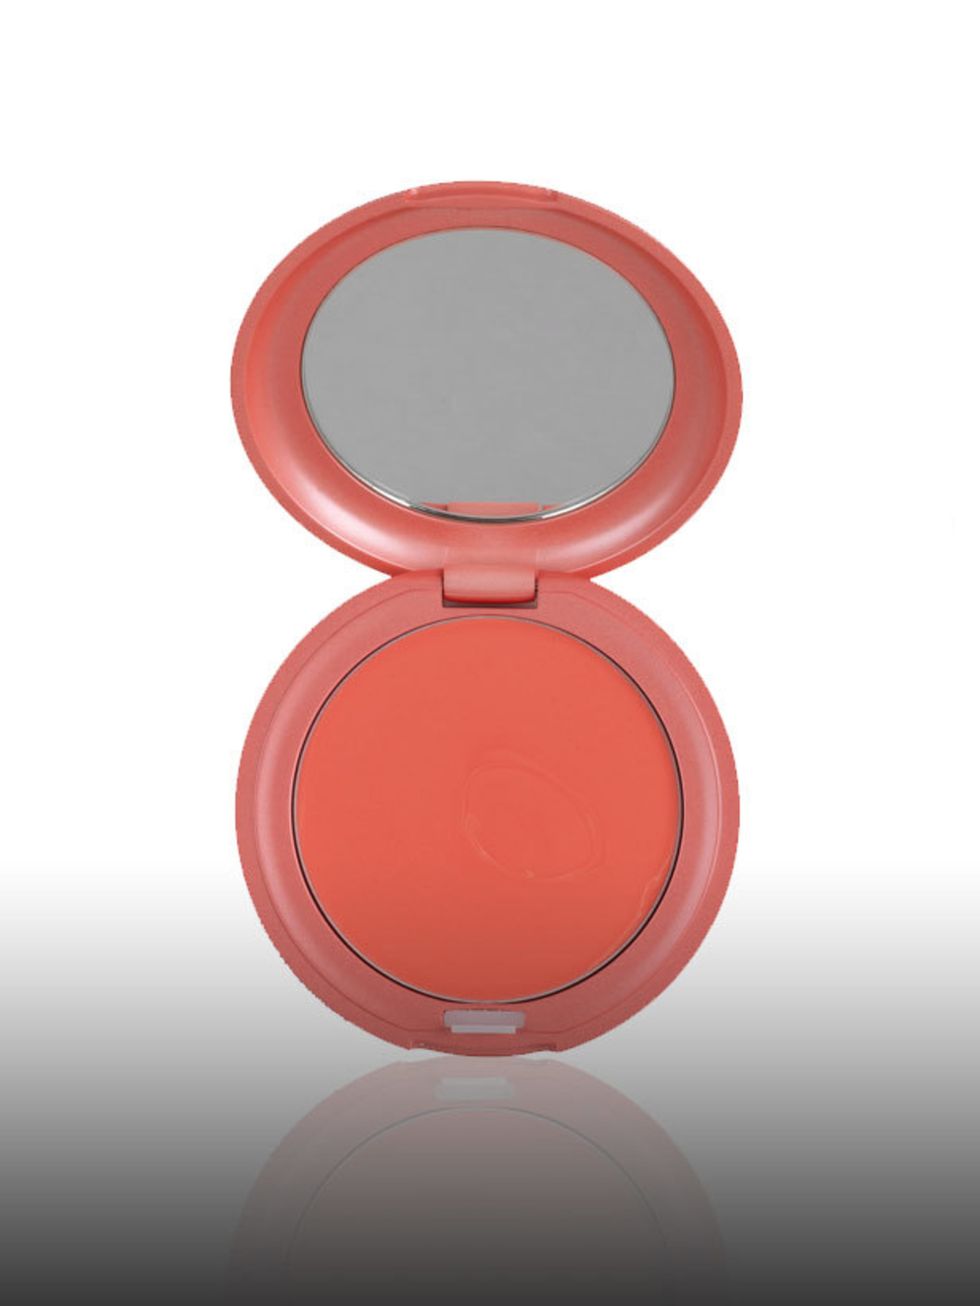 <p>Convertible Colour, dual lip and cheek cream in 'Petunia', £18 by Stila at <a href="http://www.hqhair.com/code/products.asp?PageID=906&amp;SectionID=1285&amp;FeaturedProduct=7027&amp;pID=1">HQhair.com</a> </p><p>Alexa loves cream blushers as they look 